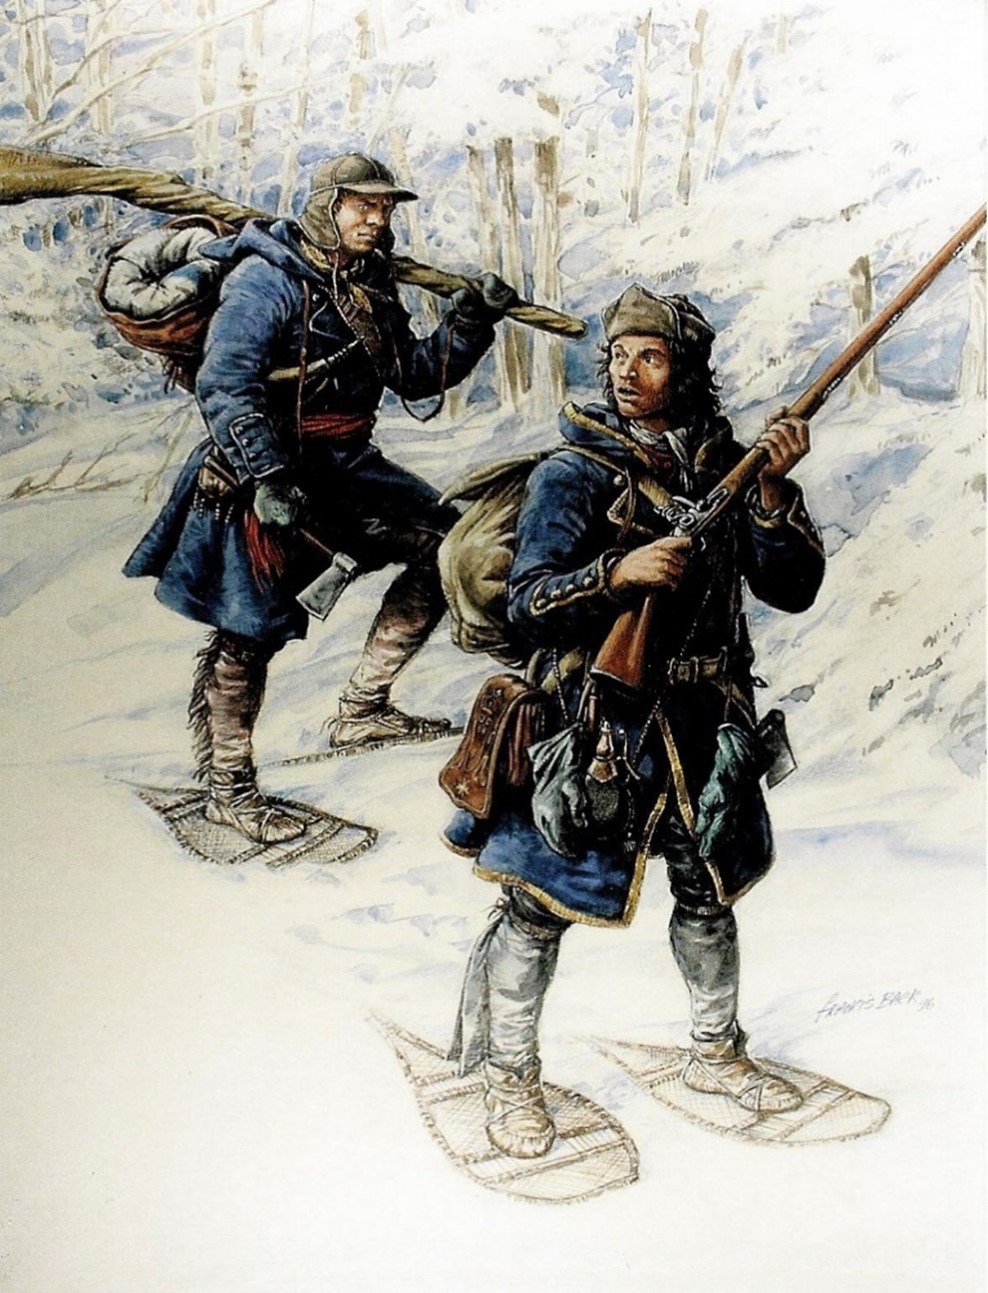 Two men with toque-like hats, long 18th C-style jackets, and snow shoes wander through the woods on a blustery, snow-covered day with bundles on their backs and rifles in their hands.